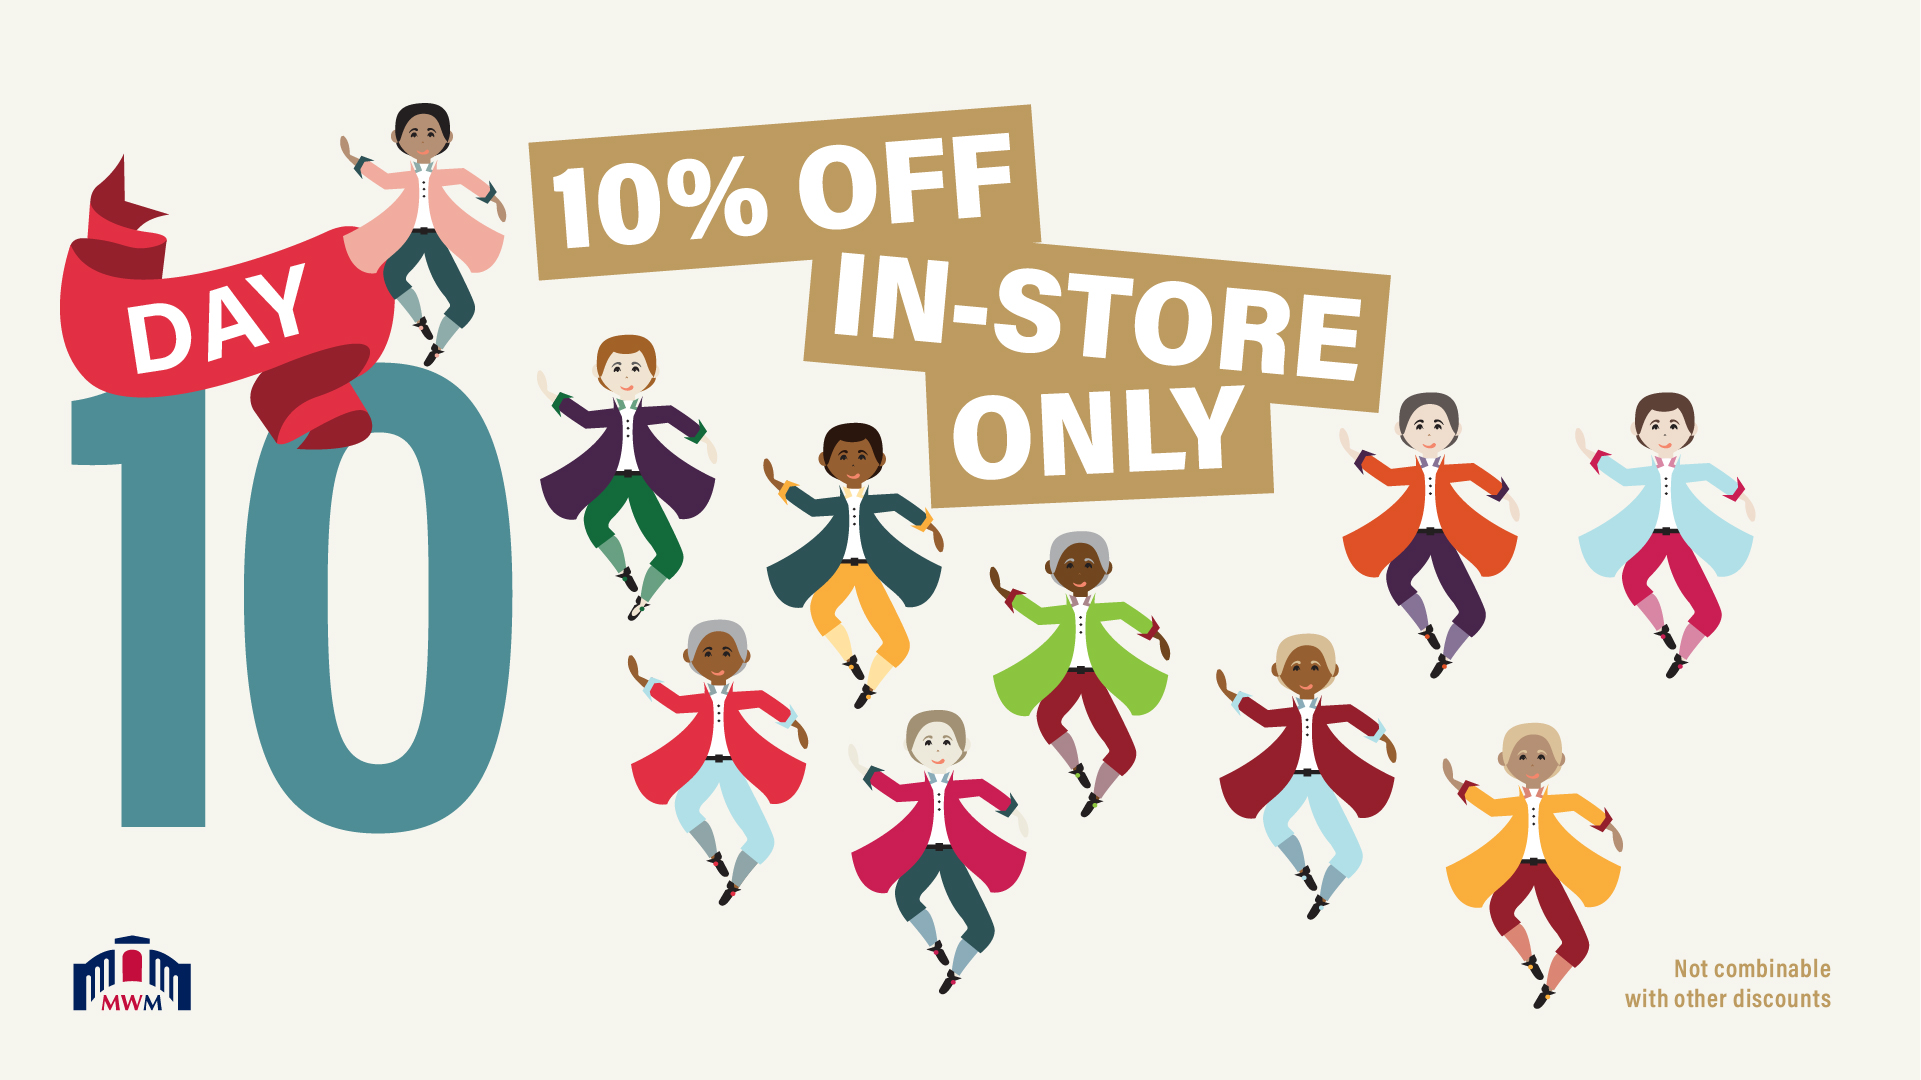 The Twelve Days of Christmas. Day 10 with ten lords a-leaping. The words 10% in-store only.